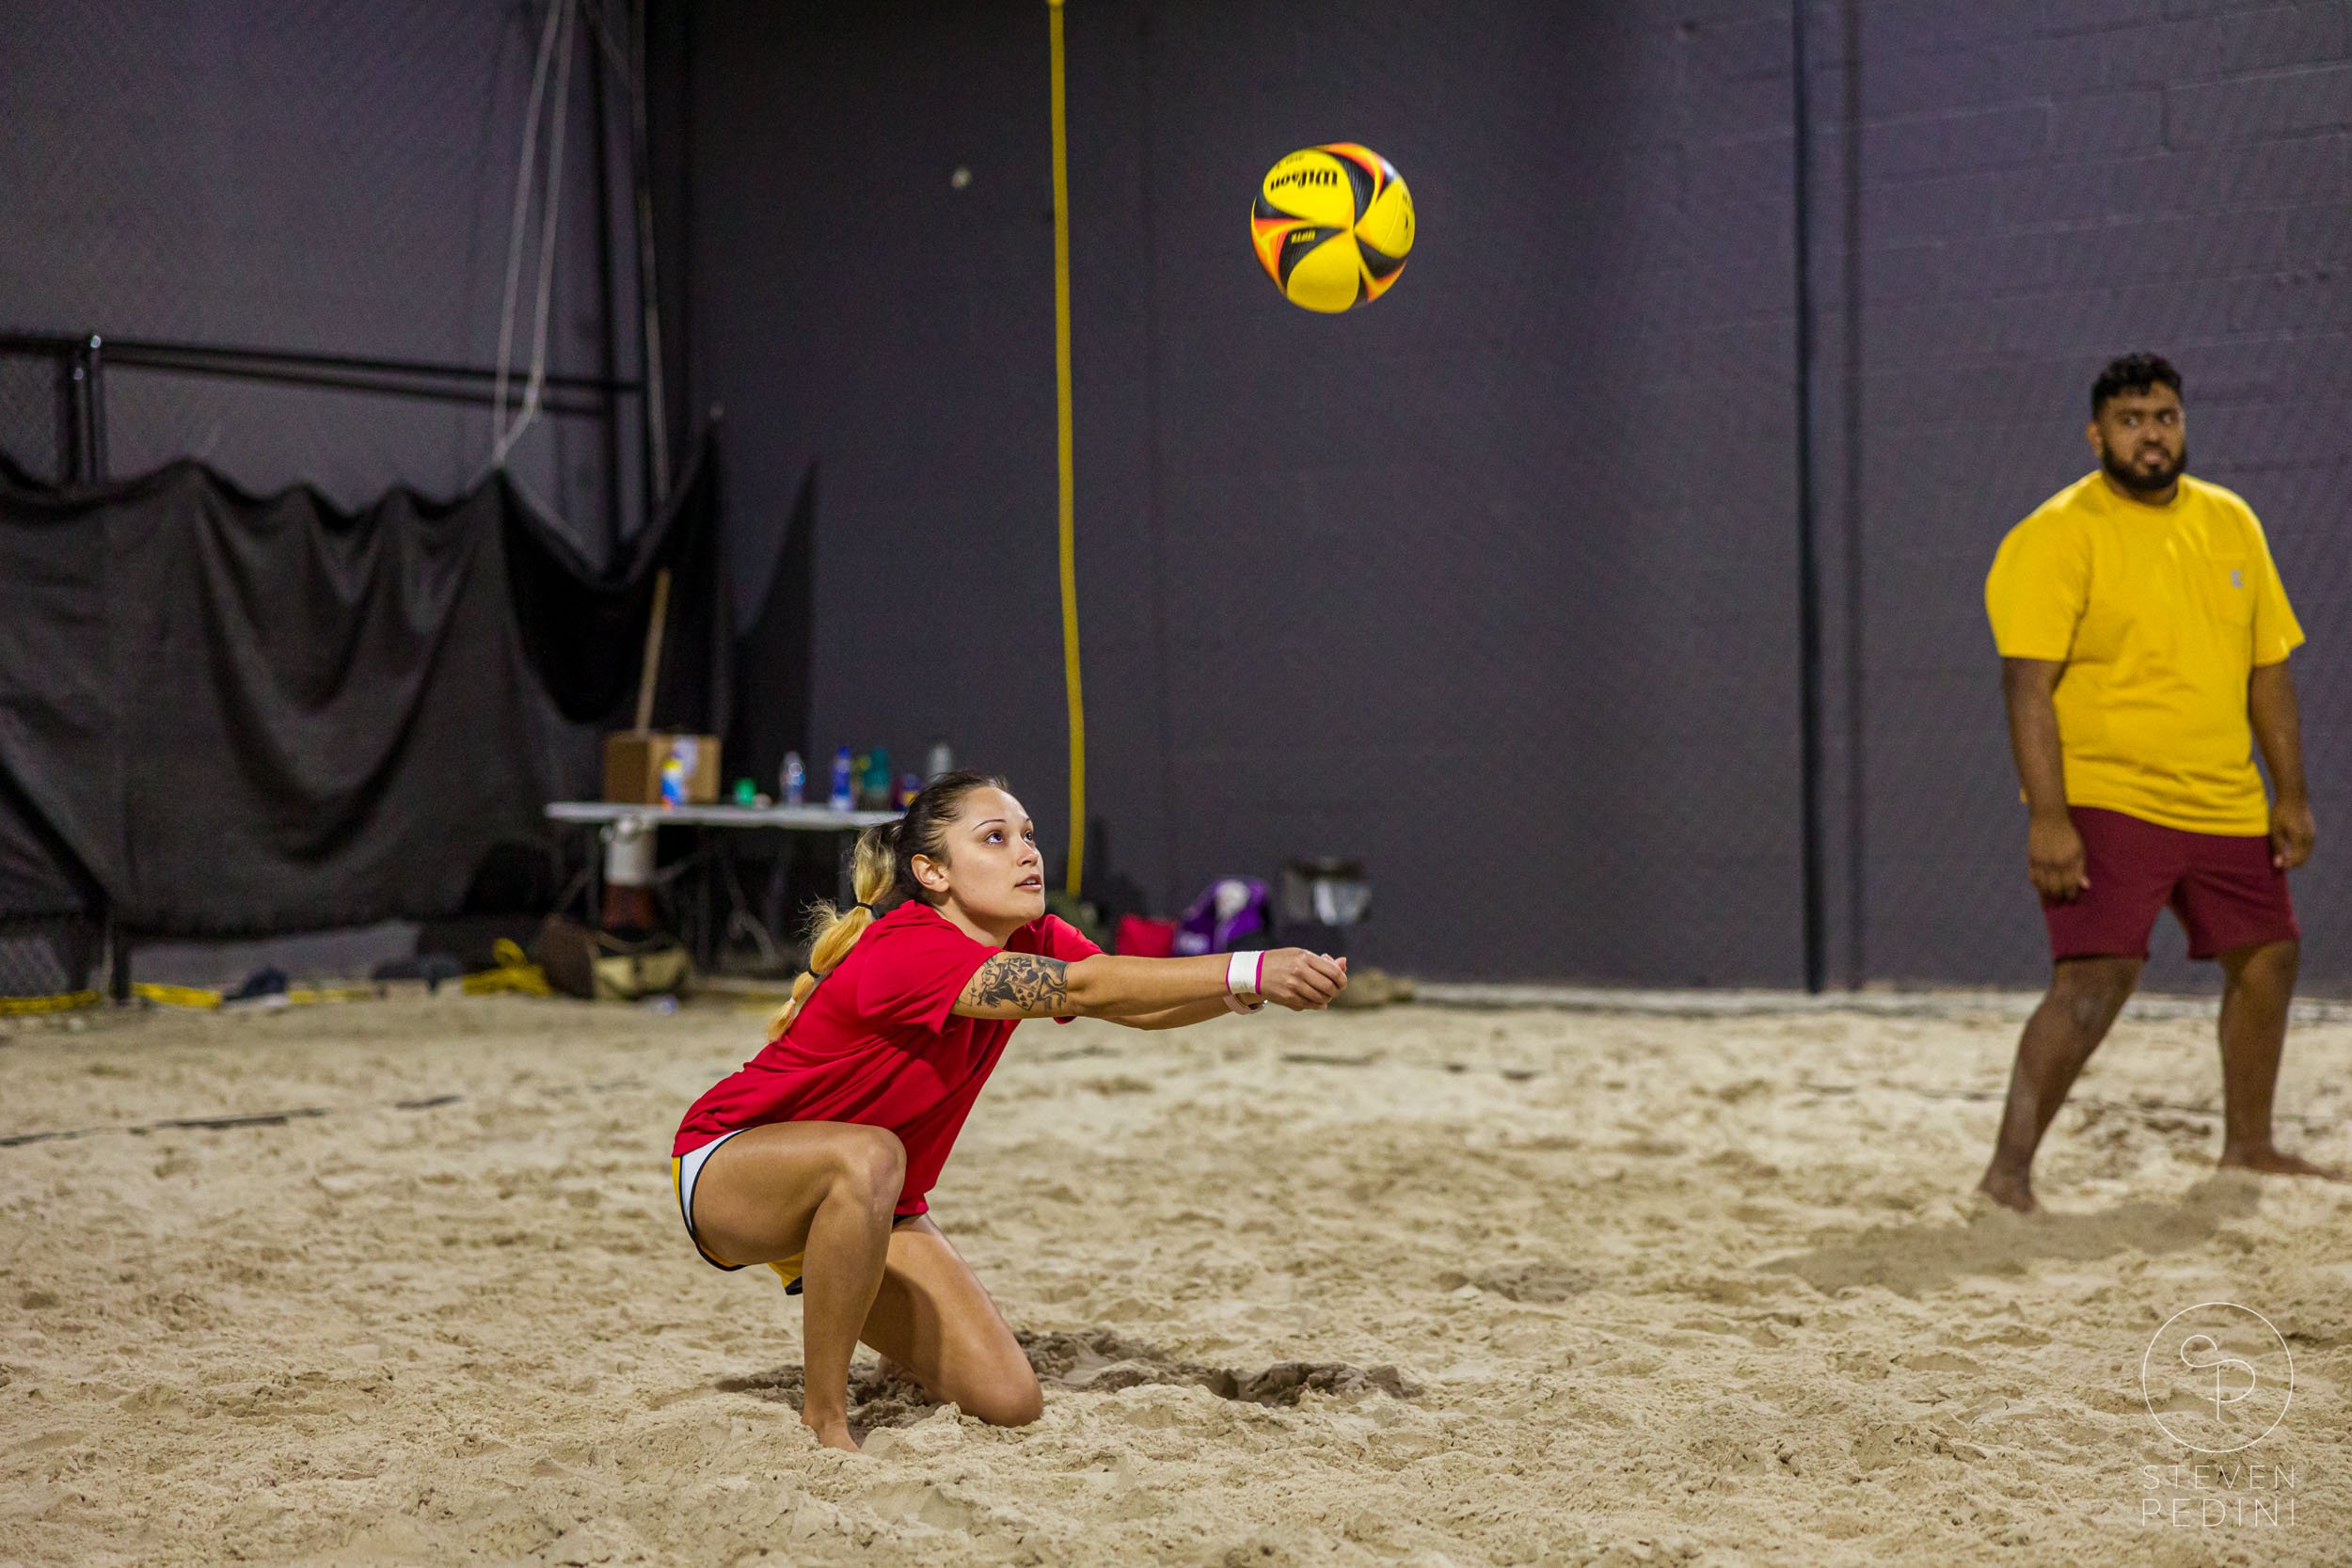 Steven Pedini Photography - Bumpy Pickle - Sand Volleyball - Houston TX - World Cup of Volleyball - 00323.jpg